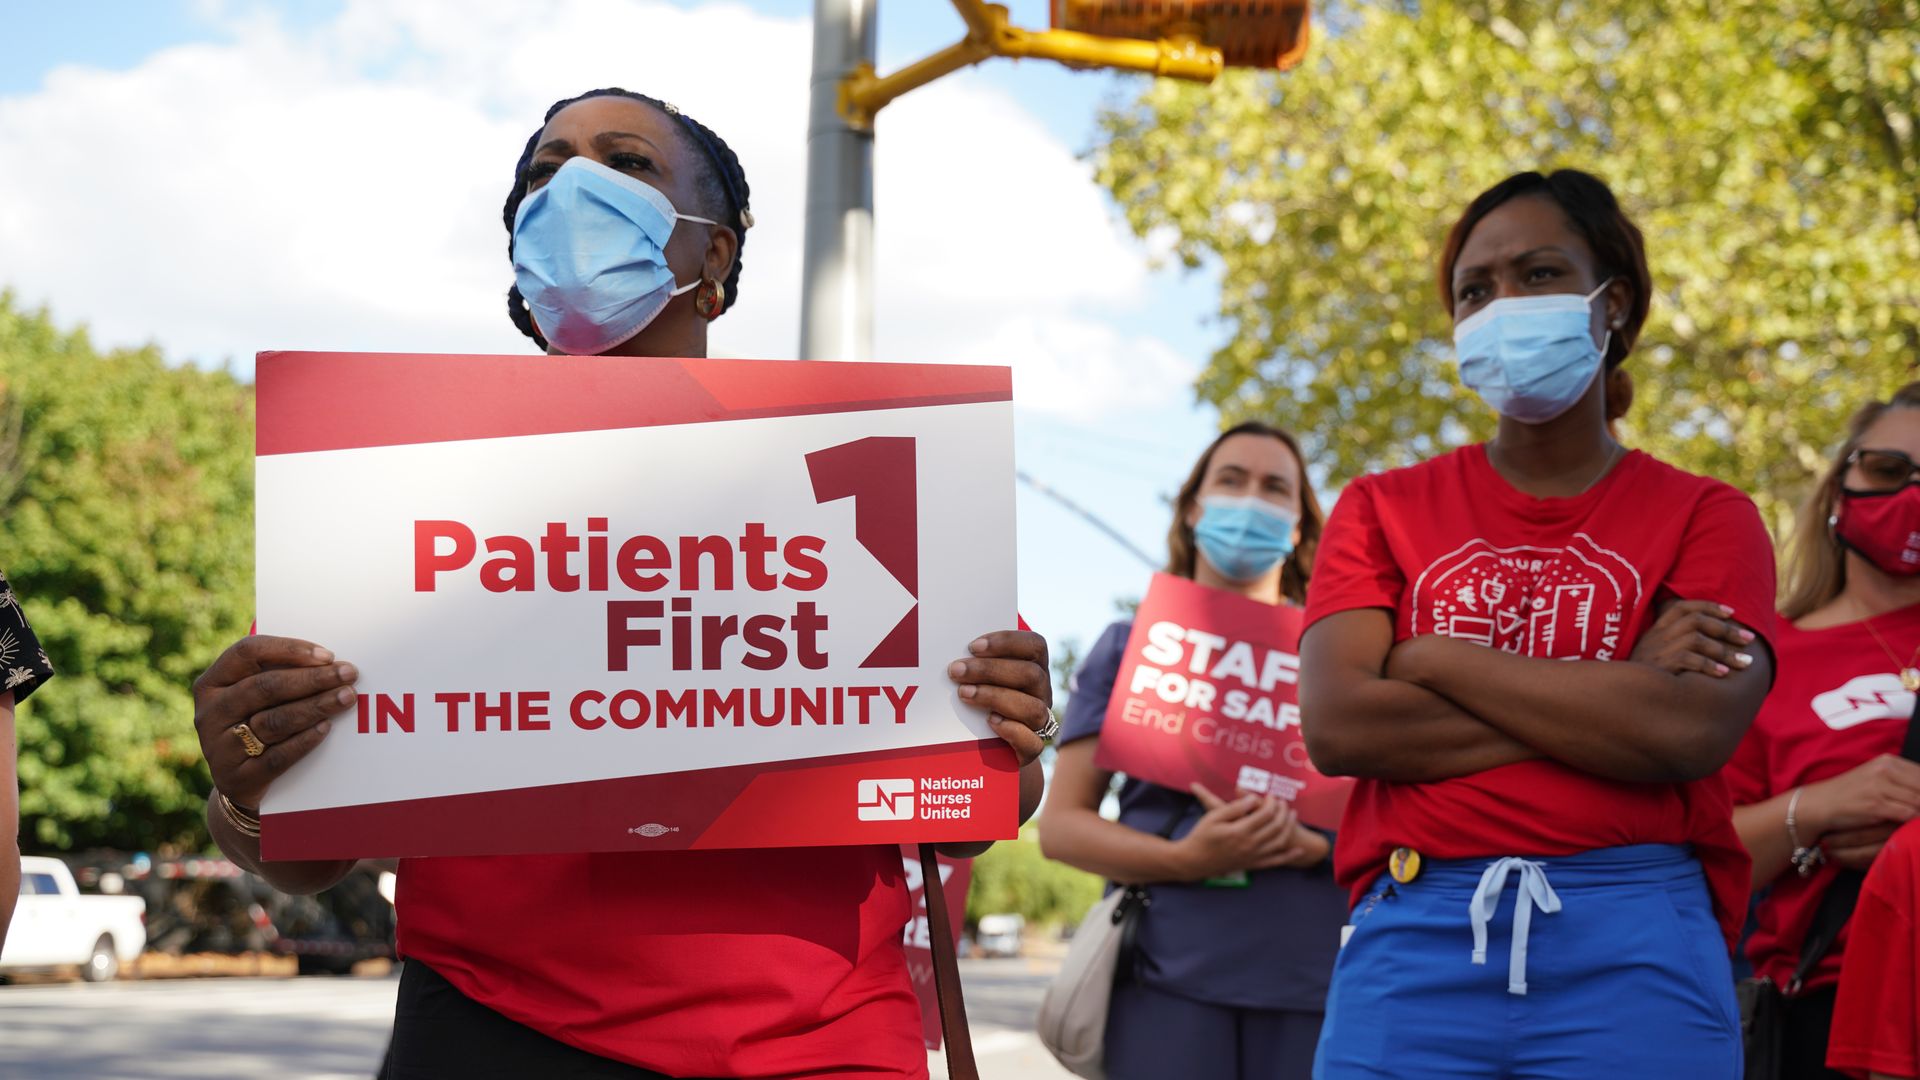 Photo of a masked person holding a sign that says "Patients First" at a rally protesting staffing shortages